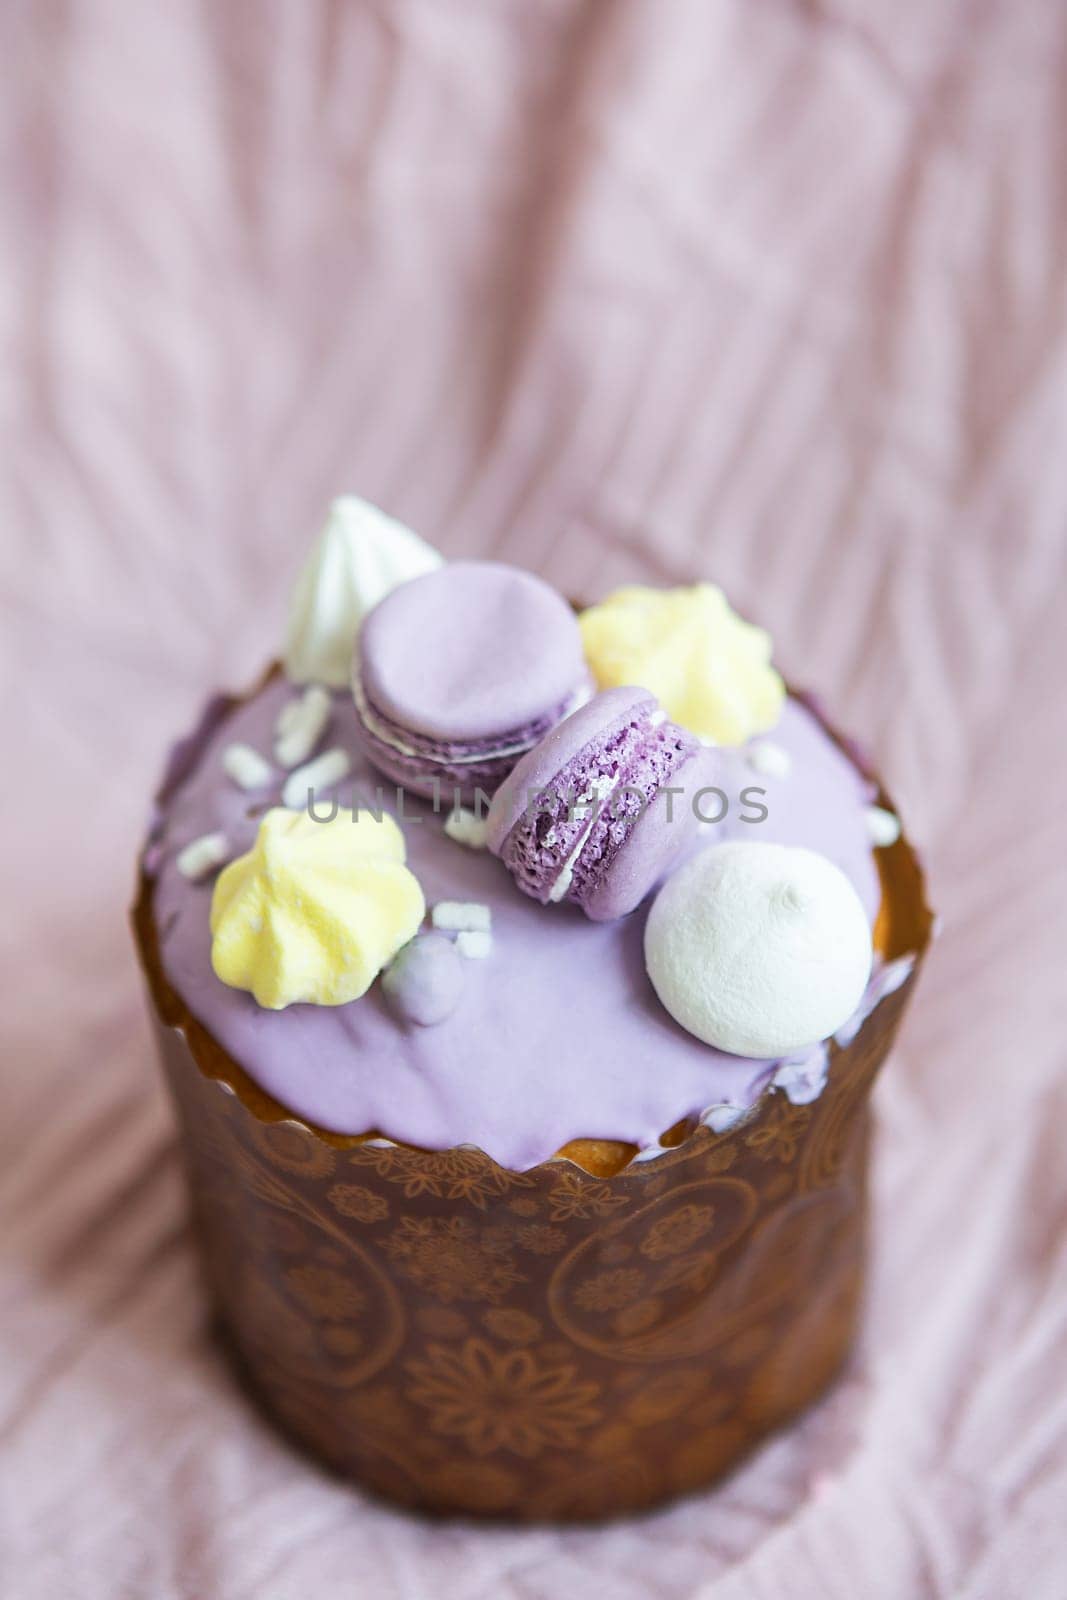 A traditional paska decorated with white Swiss chocolate and meringue stands on a lavender tablecloth. Easter holiday. by sfinks